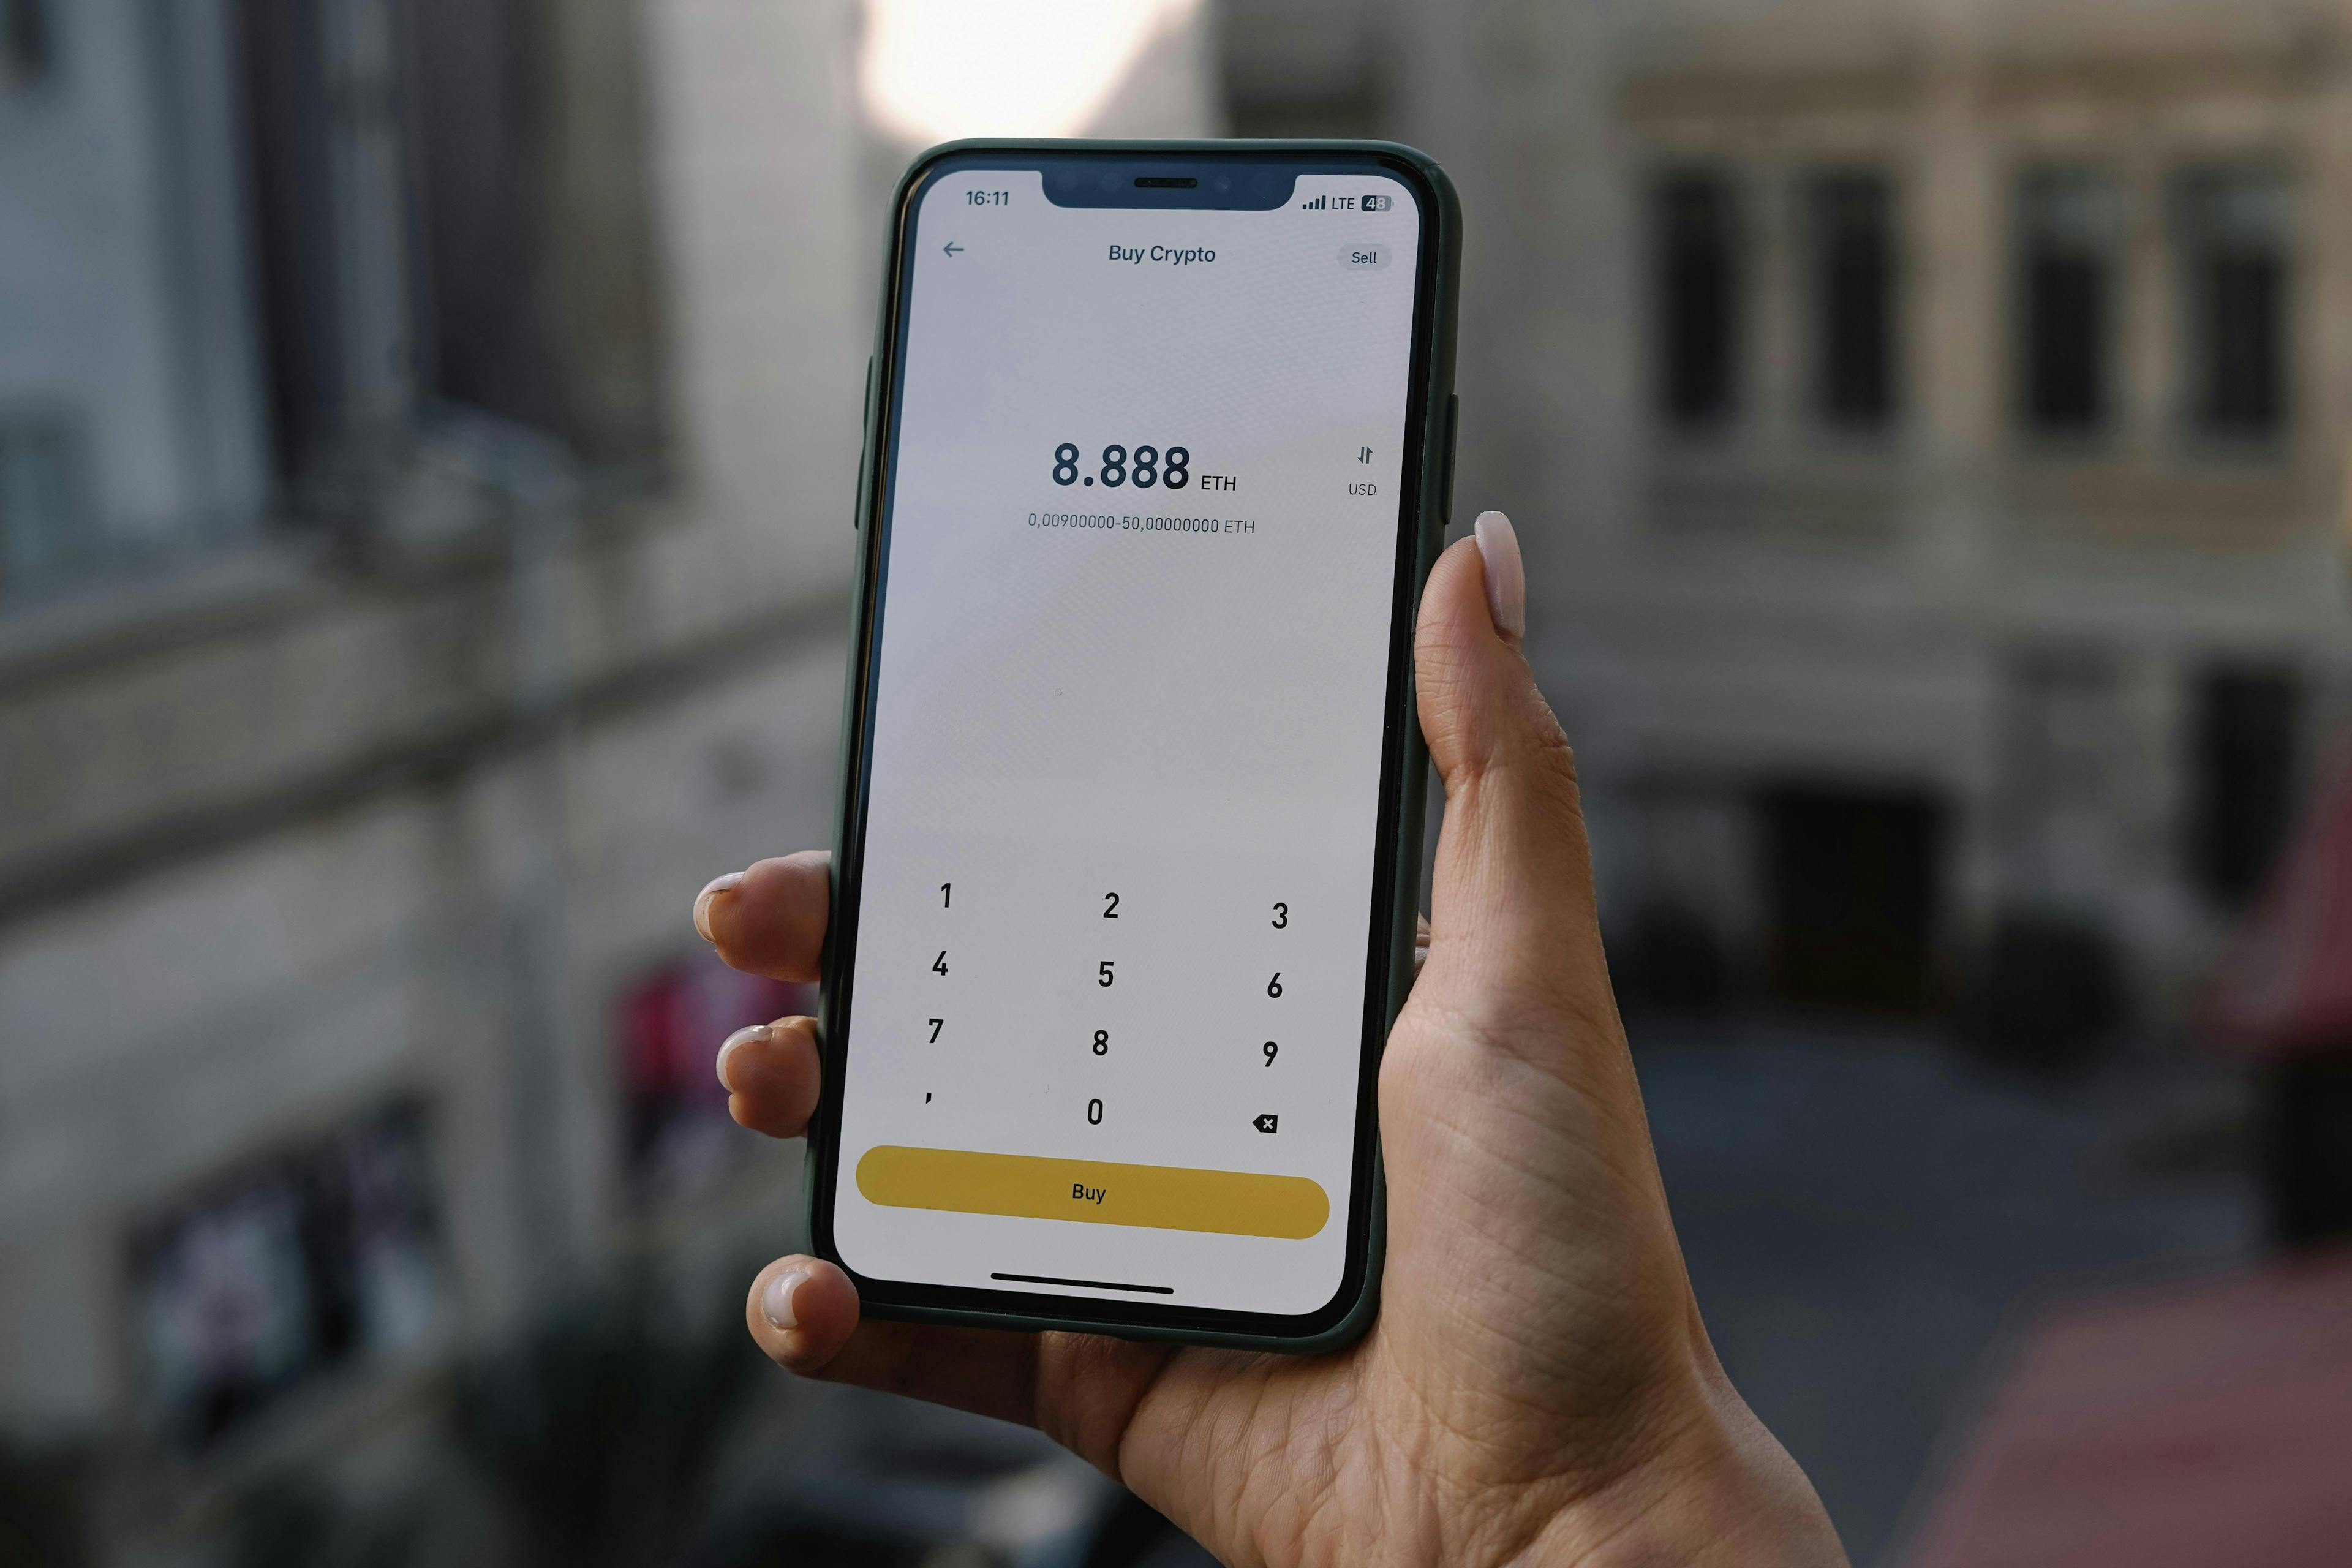 A hand holds a smartphone displaying a cryptocurrency purchase screen showing 8.888 ETH, with "Buy" and numeric keypad below. Background shows blurred urban buildings.